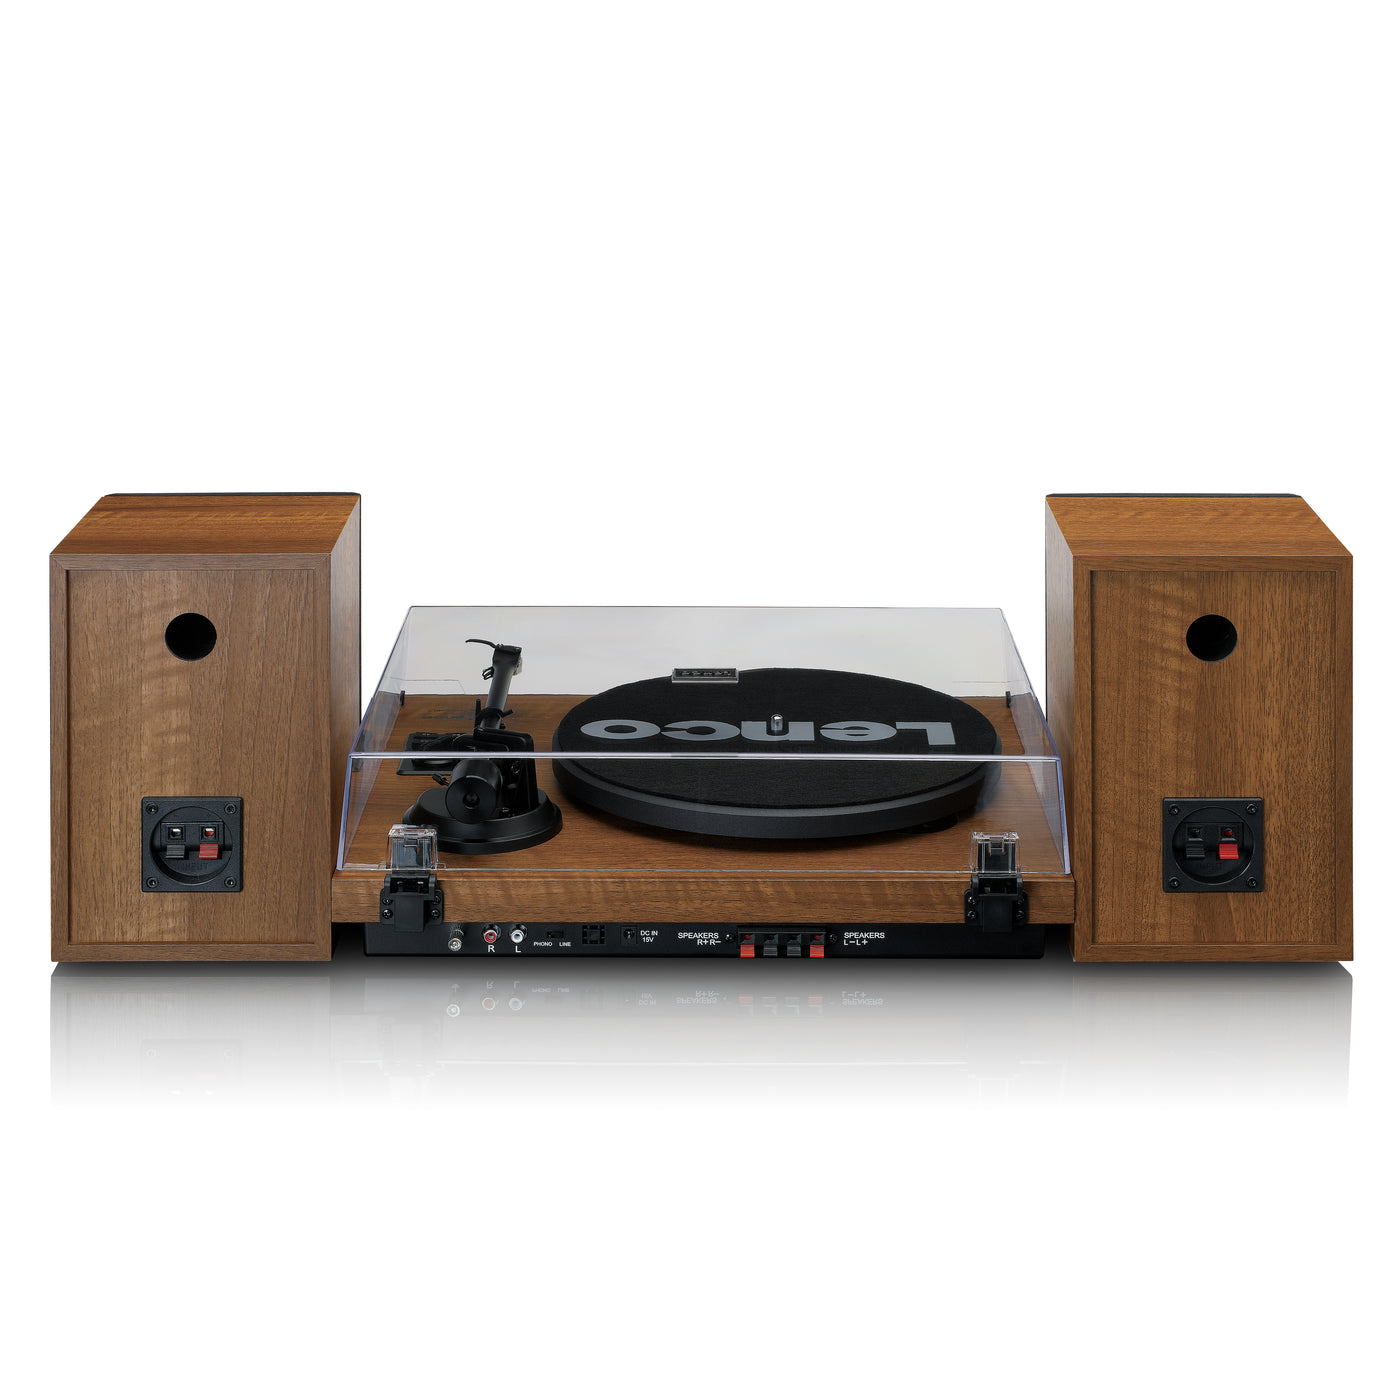 LENCO LS-480WD - Record player with built-in amplifier and Bluetooth® plus 2 external speakers - Wood